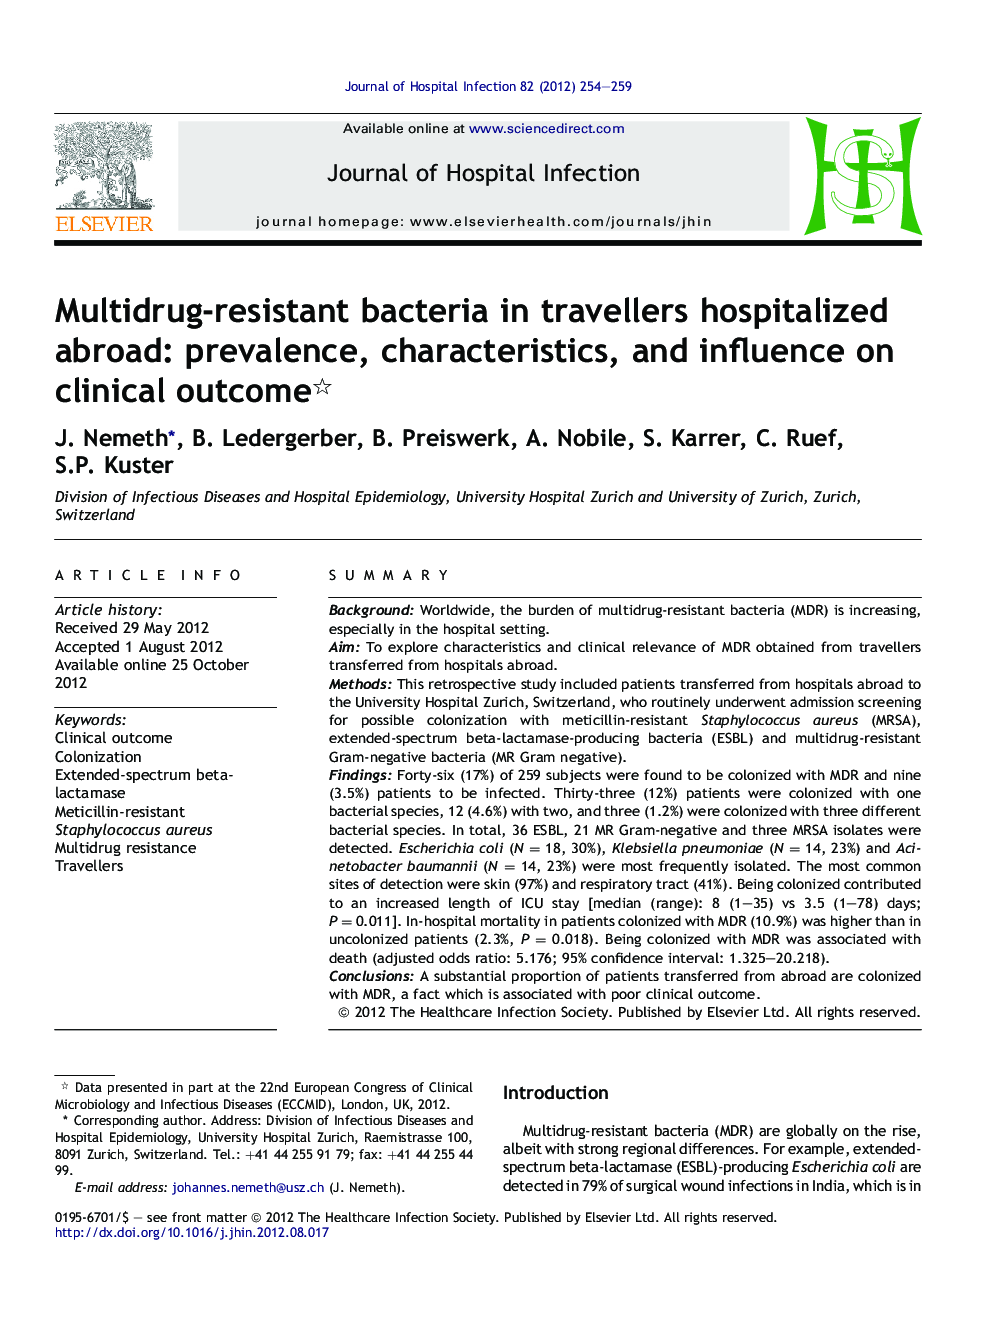 Multidrug-resistant bacteria in travellers hospitalized abroad: prevalence, characteristics, and influence on clinical outcome 